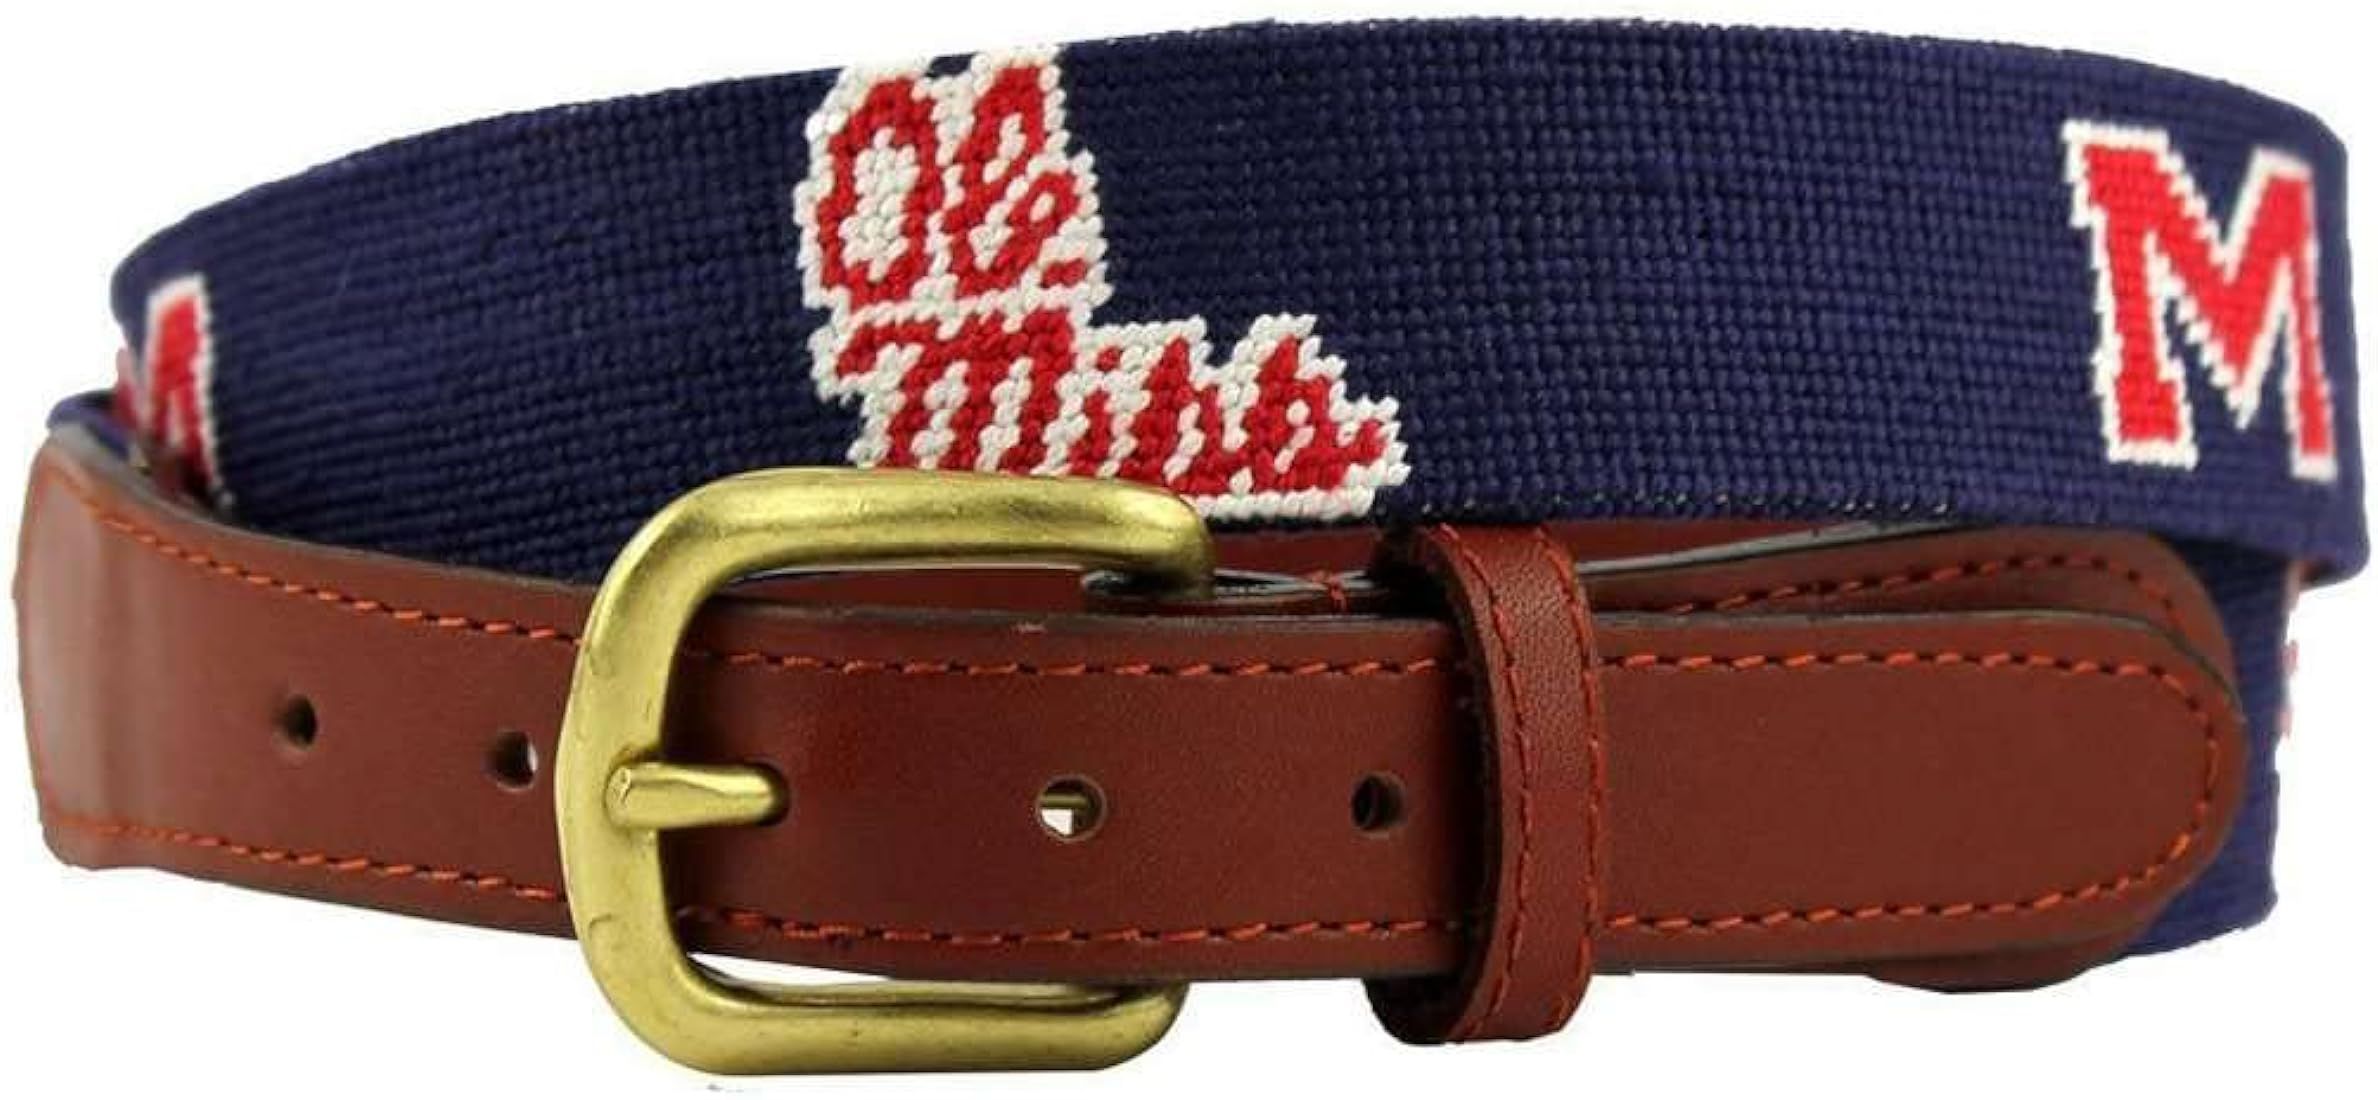 Ole Miss Needlepoint Belt in Navy and Crimson by Smathers & Branson | Amazon (US)